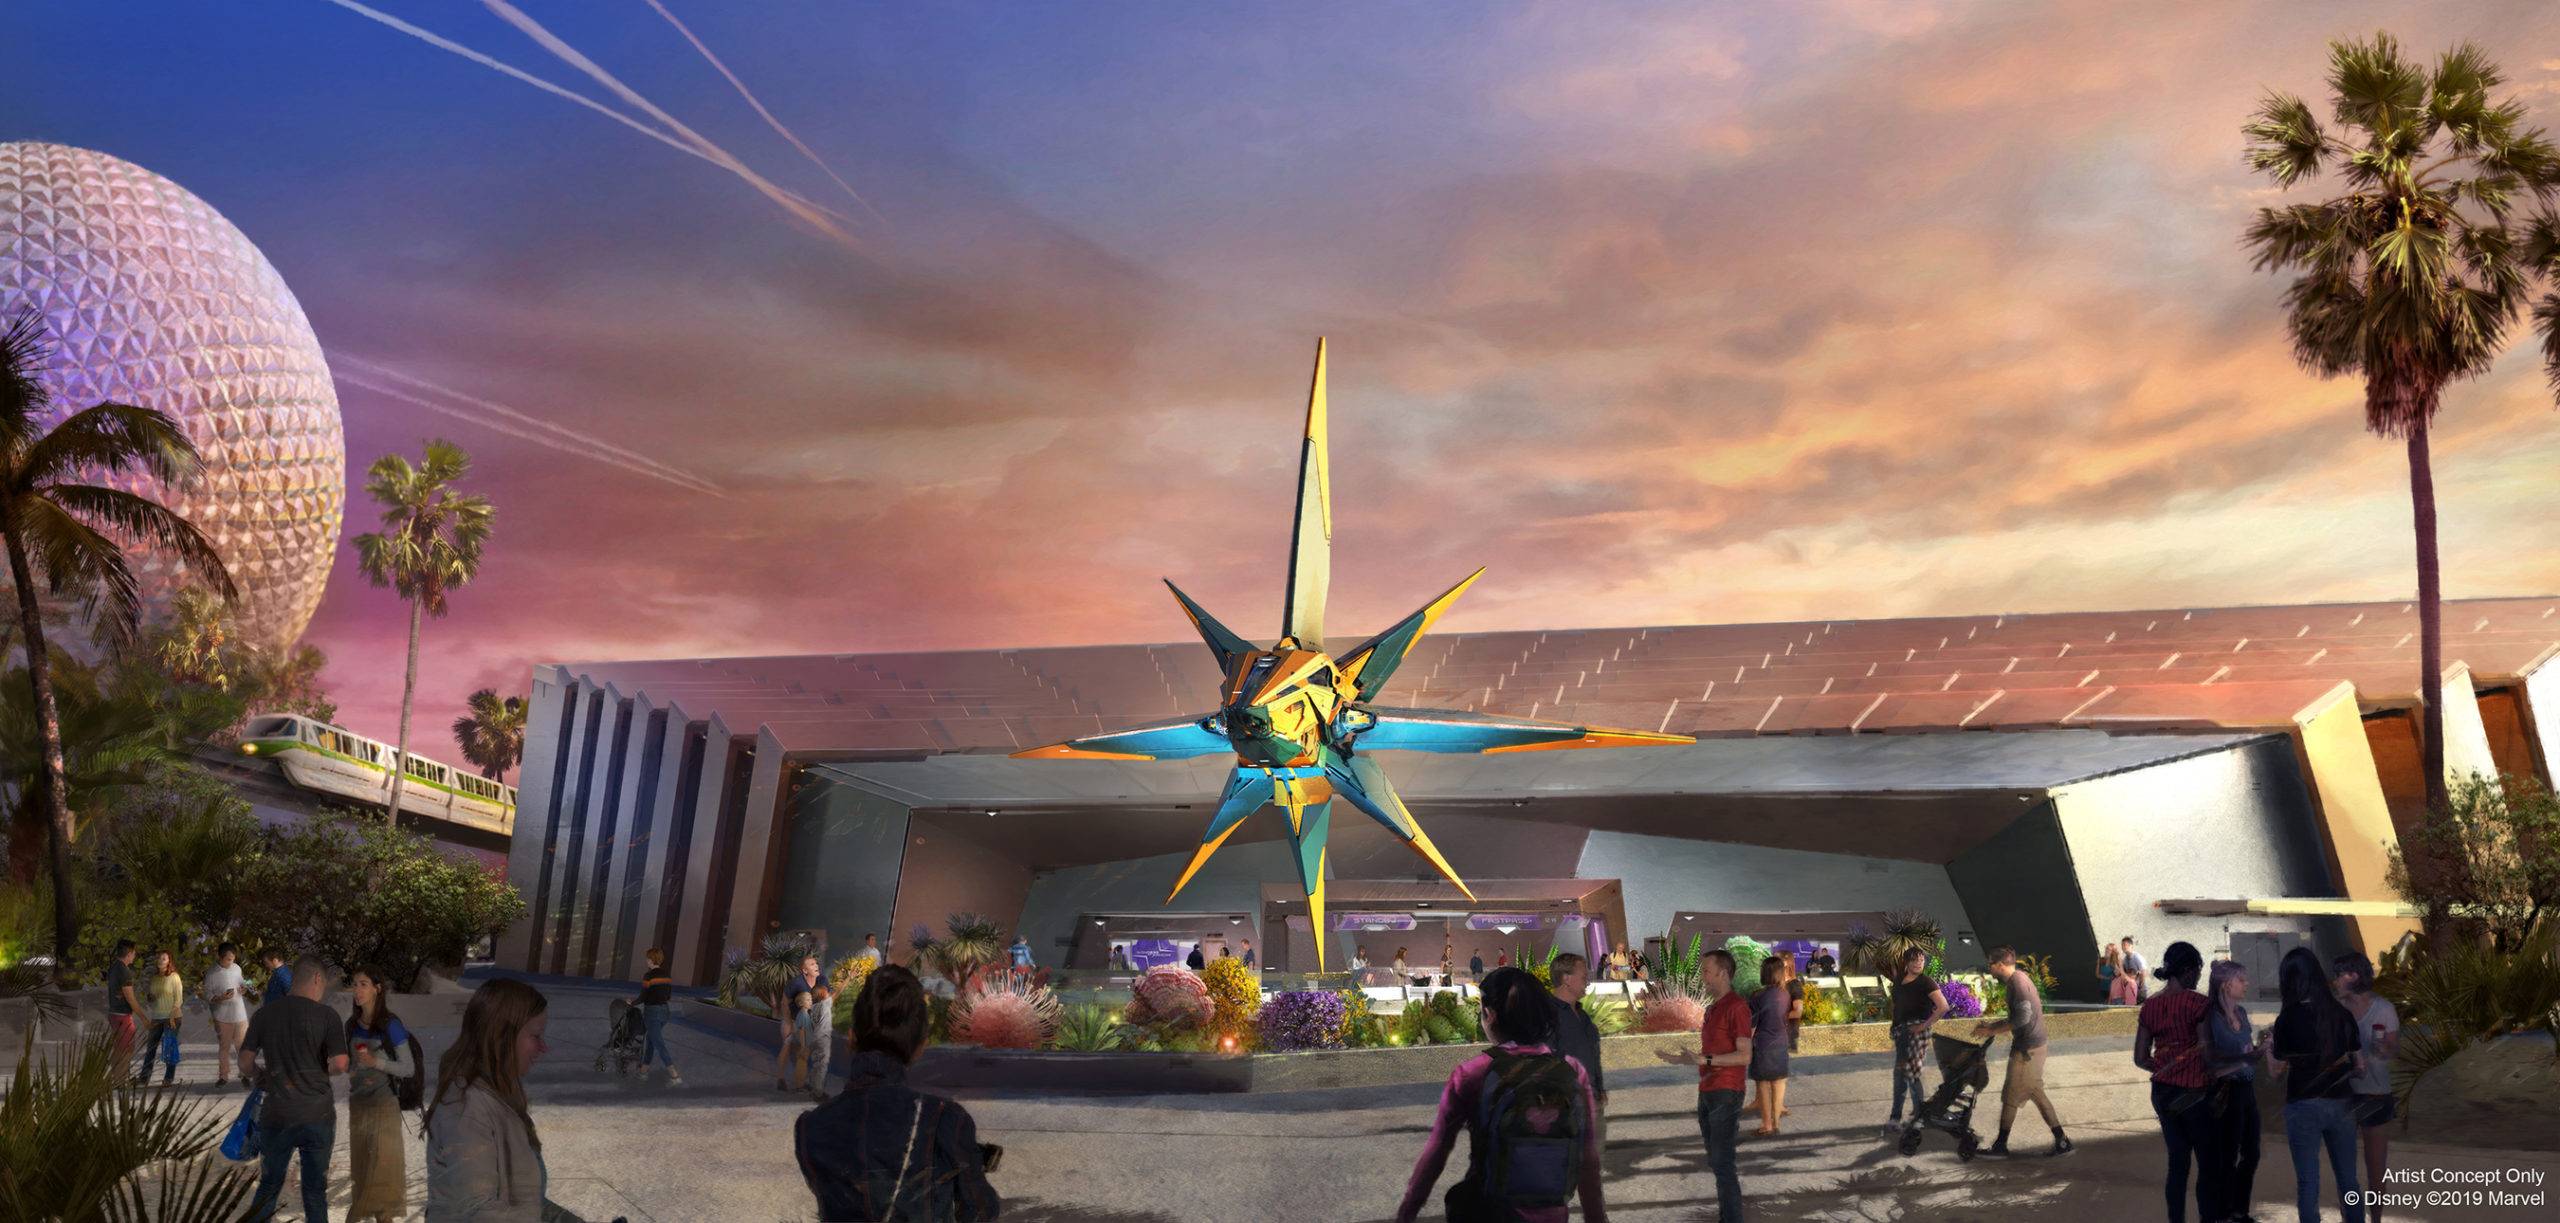 EPCOT's $450 million rollercoaster remains in the plans for the park